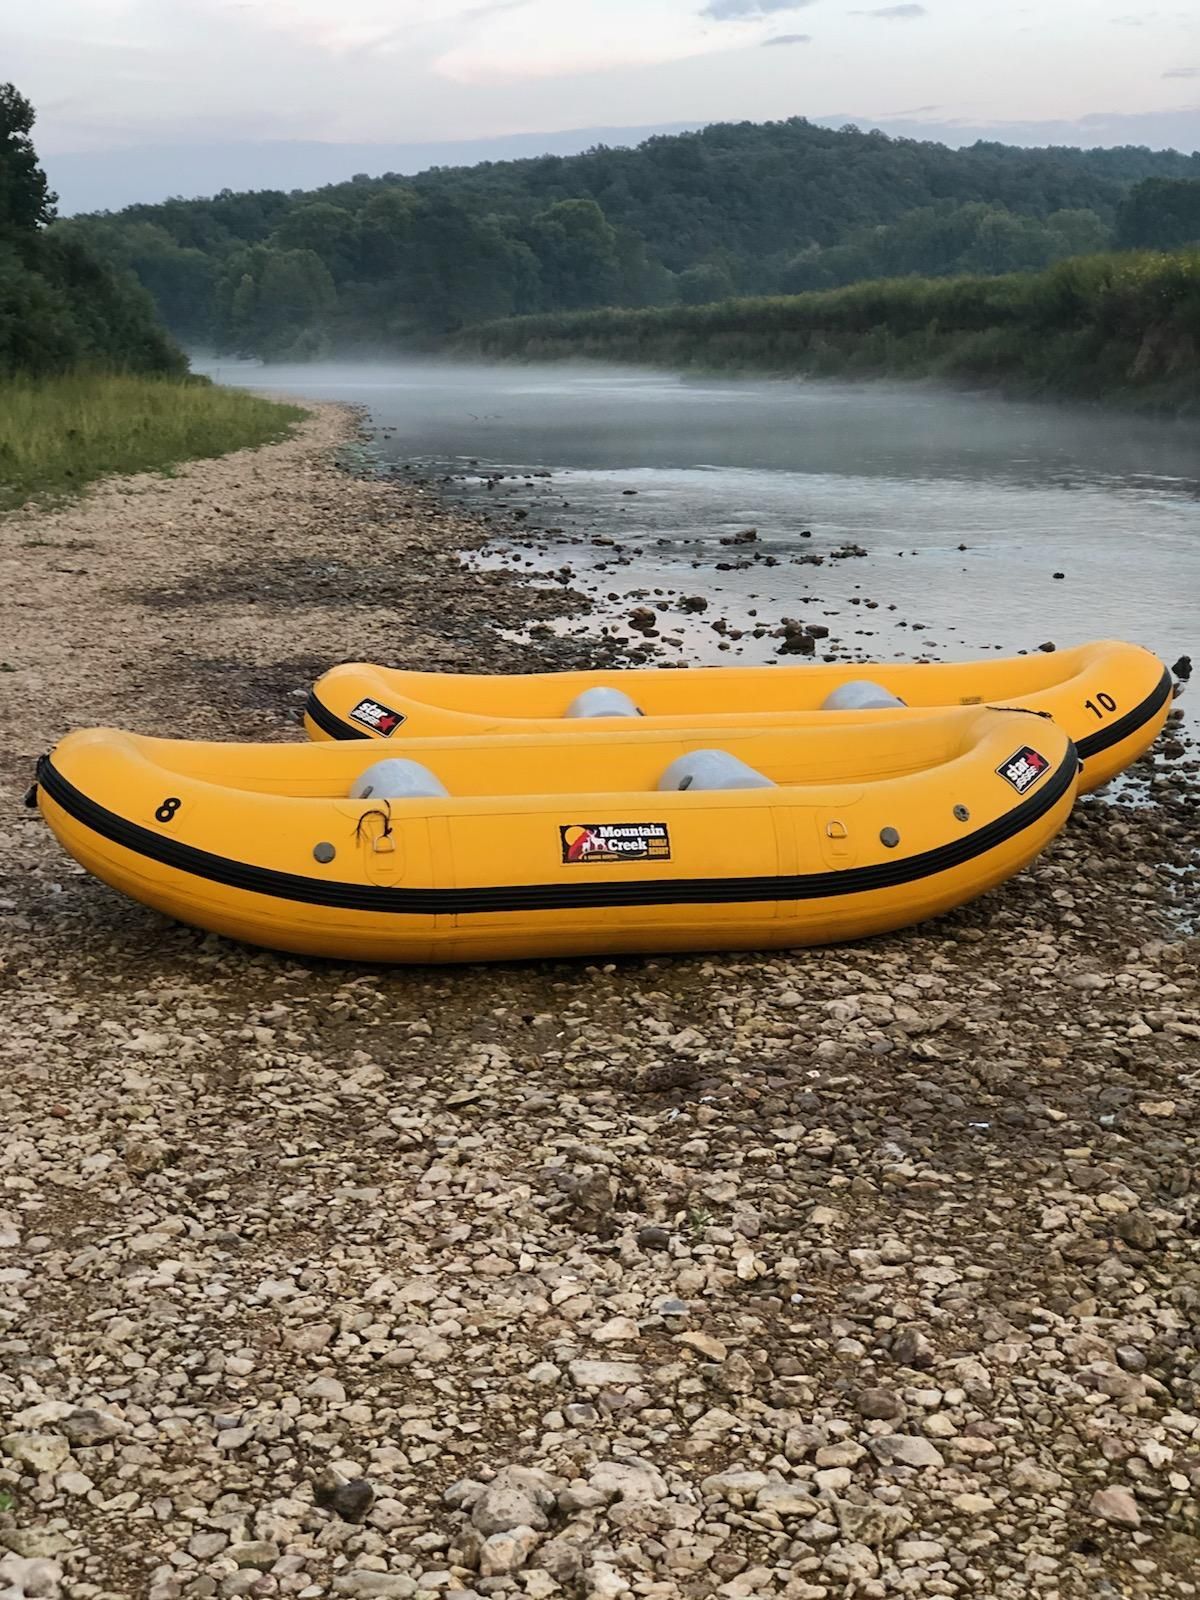 Two yellow rafts are sitting on the shore of a river.